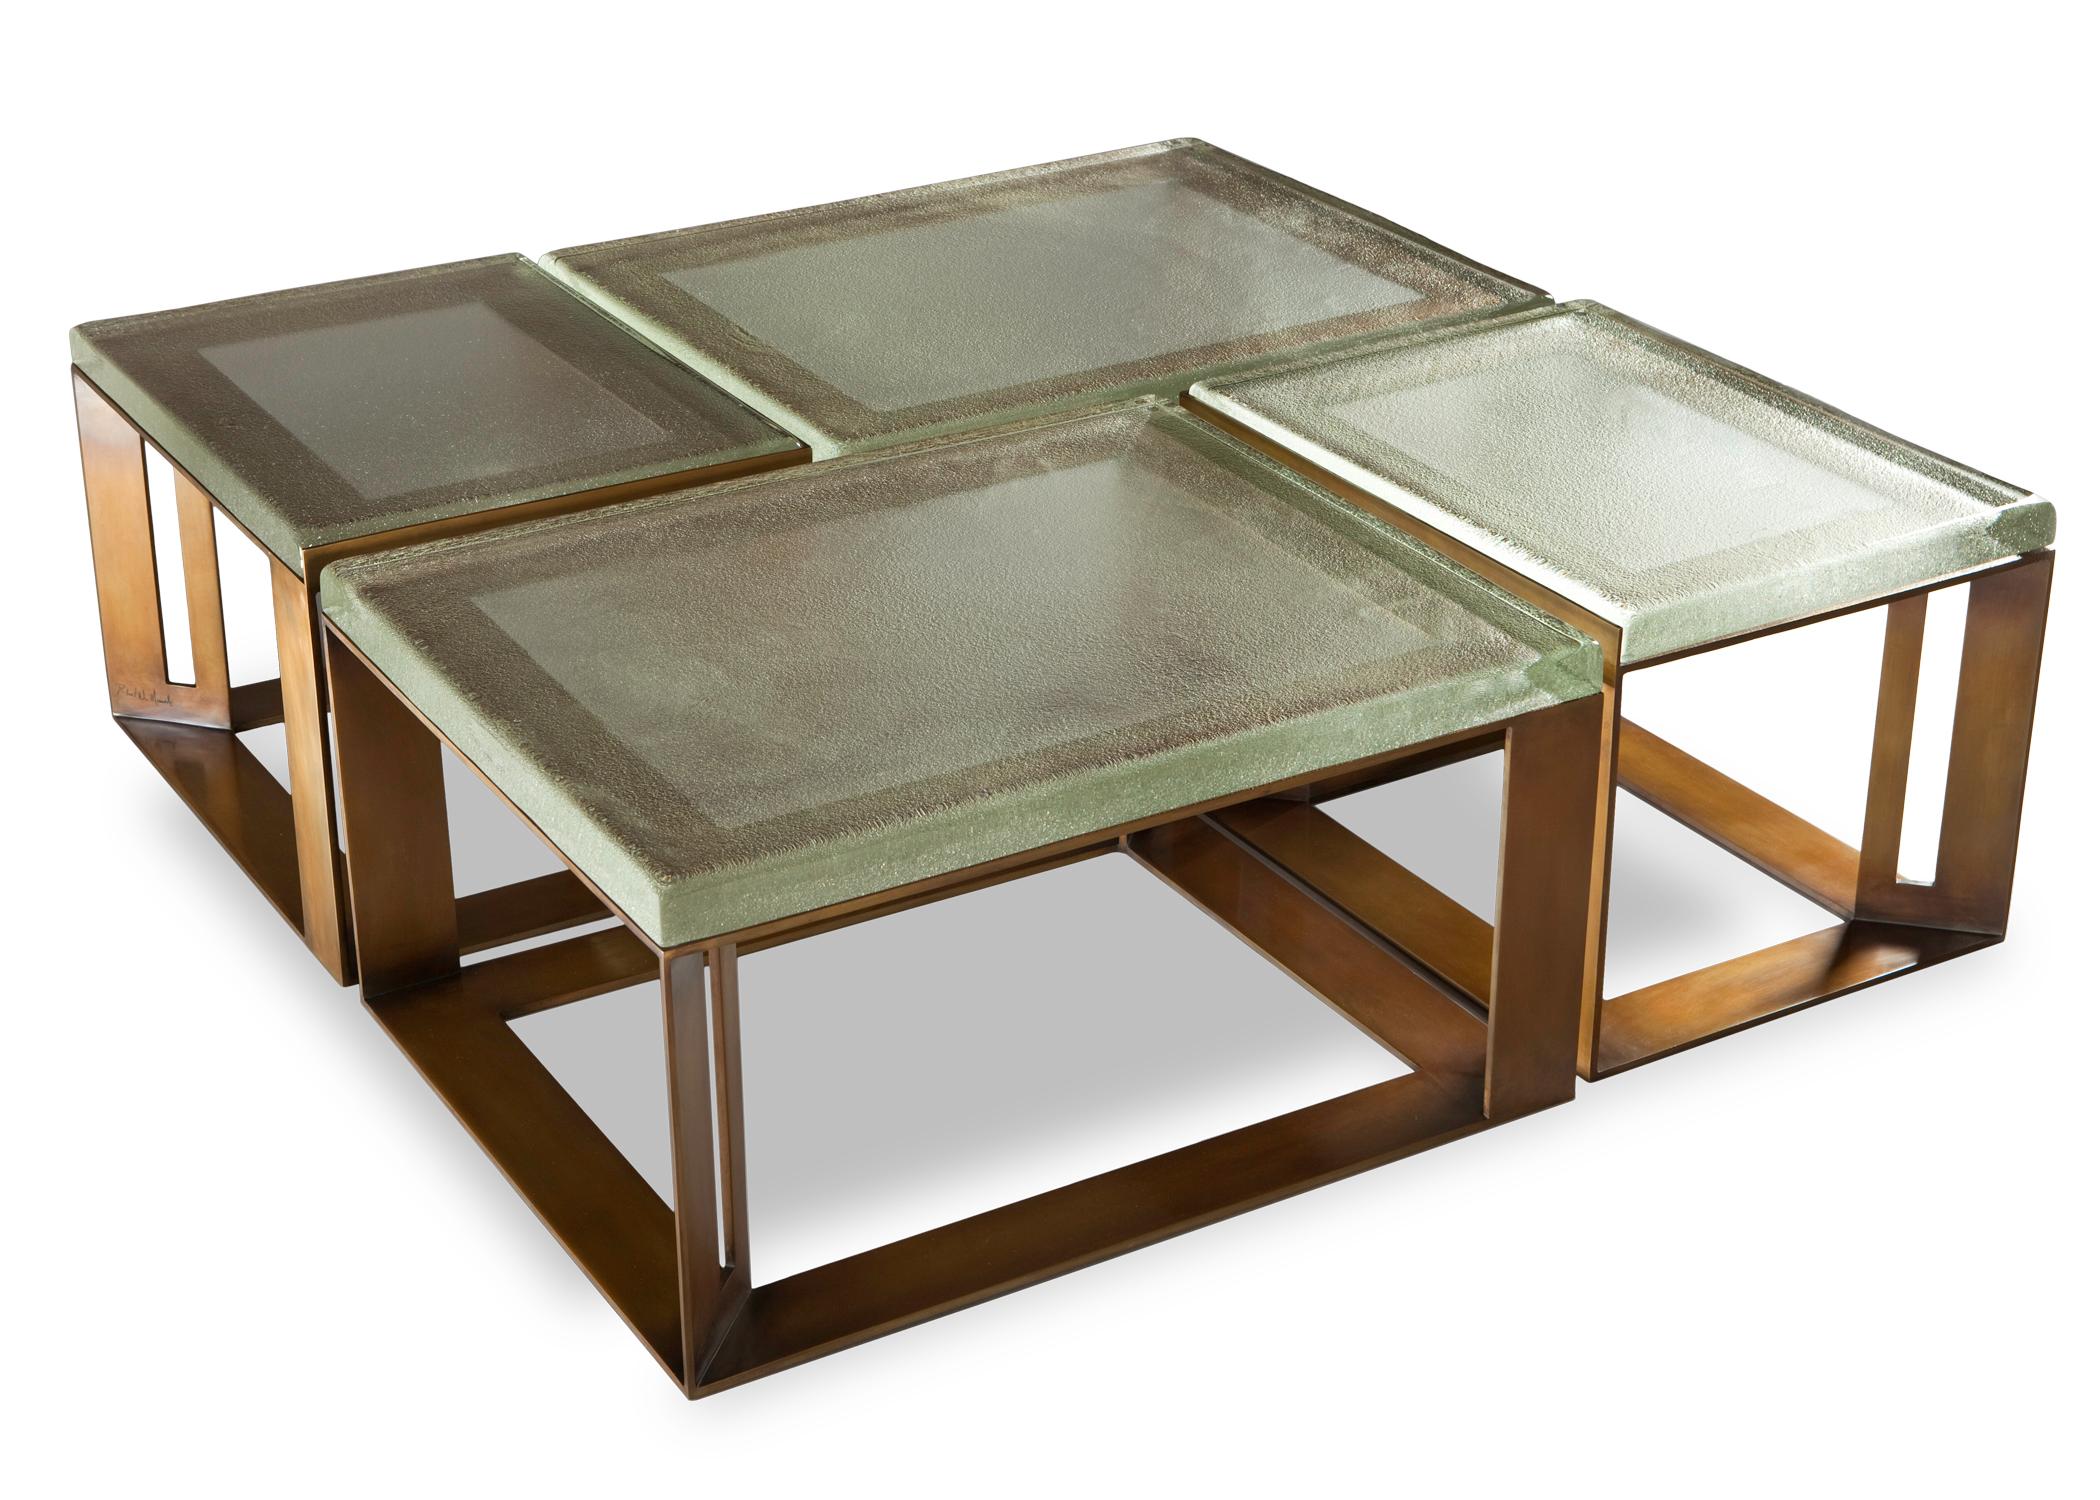 Set of four steel tables finished in a gold-brown lacquer, supporting thick cast glass tops. Custom sizes and finishes available.
Measures:
Two taller tables: Height 19” x width 18.5” x depth 25”
Two shorter tables: Height 18” x width 31” x depth